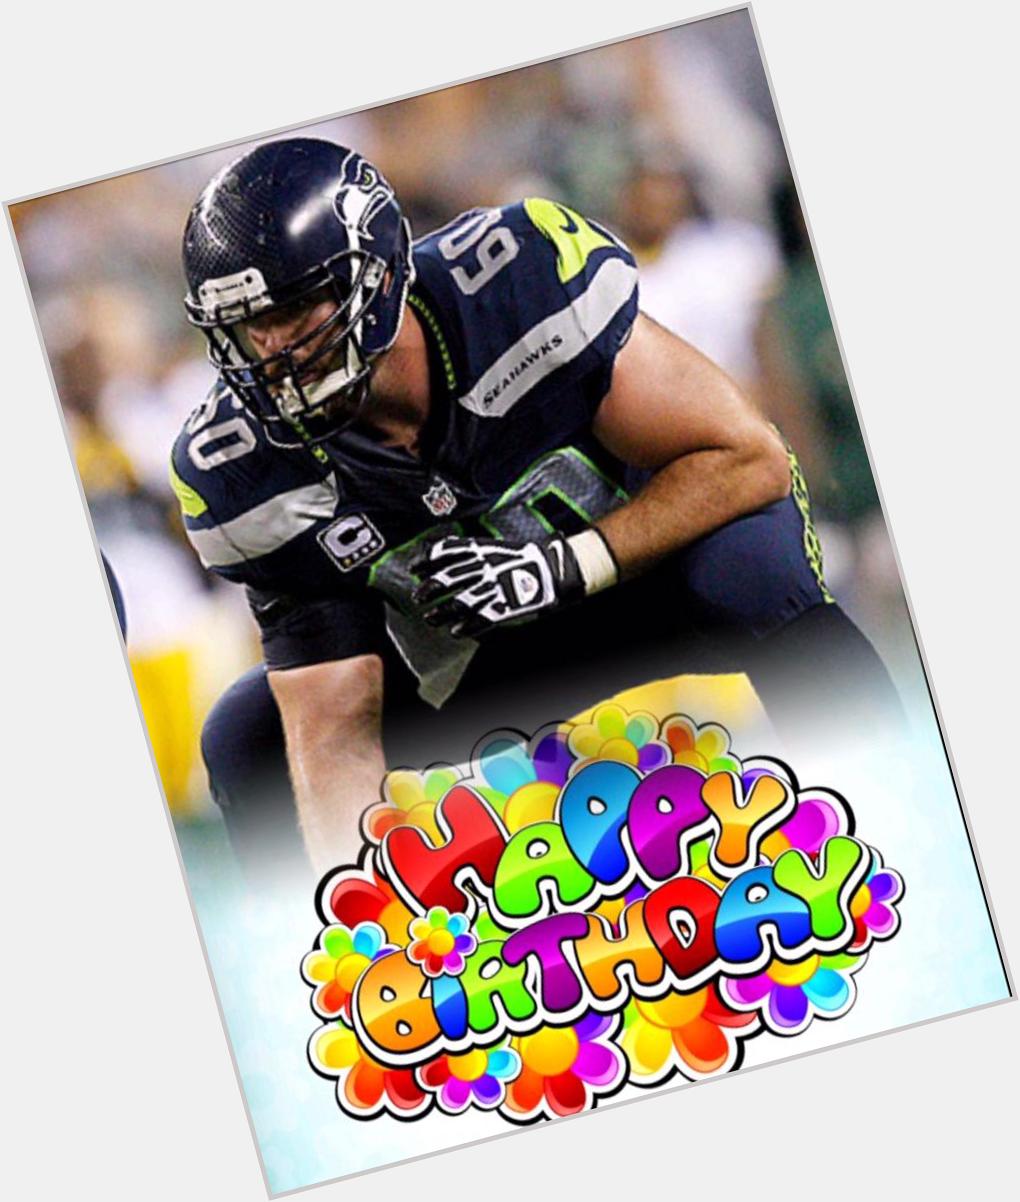 Happy Birthday to C Max Unger. He has been to 2 Pro Bowls and has a Super Bowl ring over his 6-year career. 